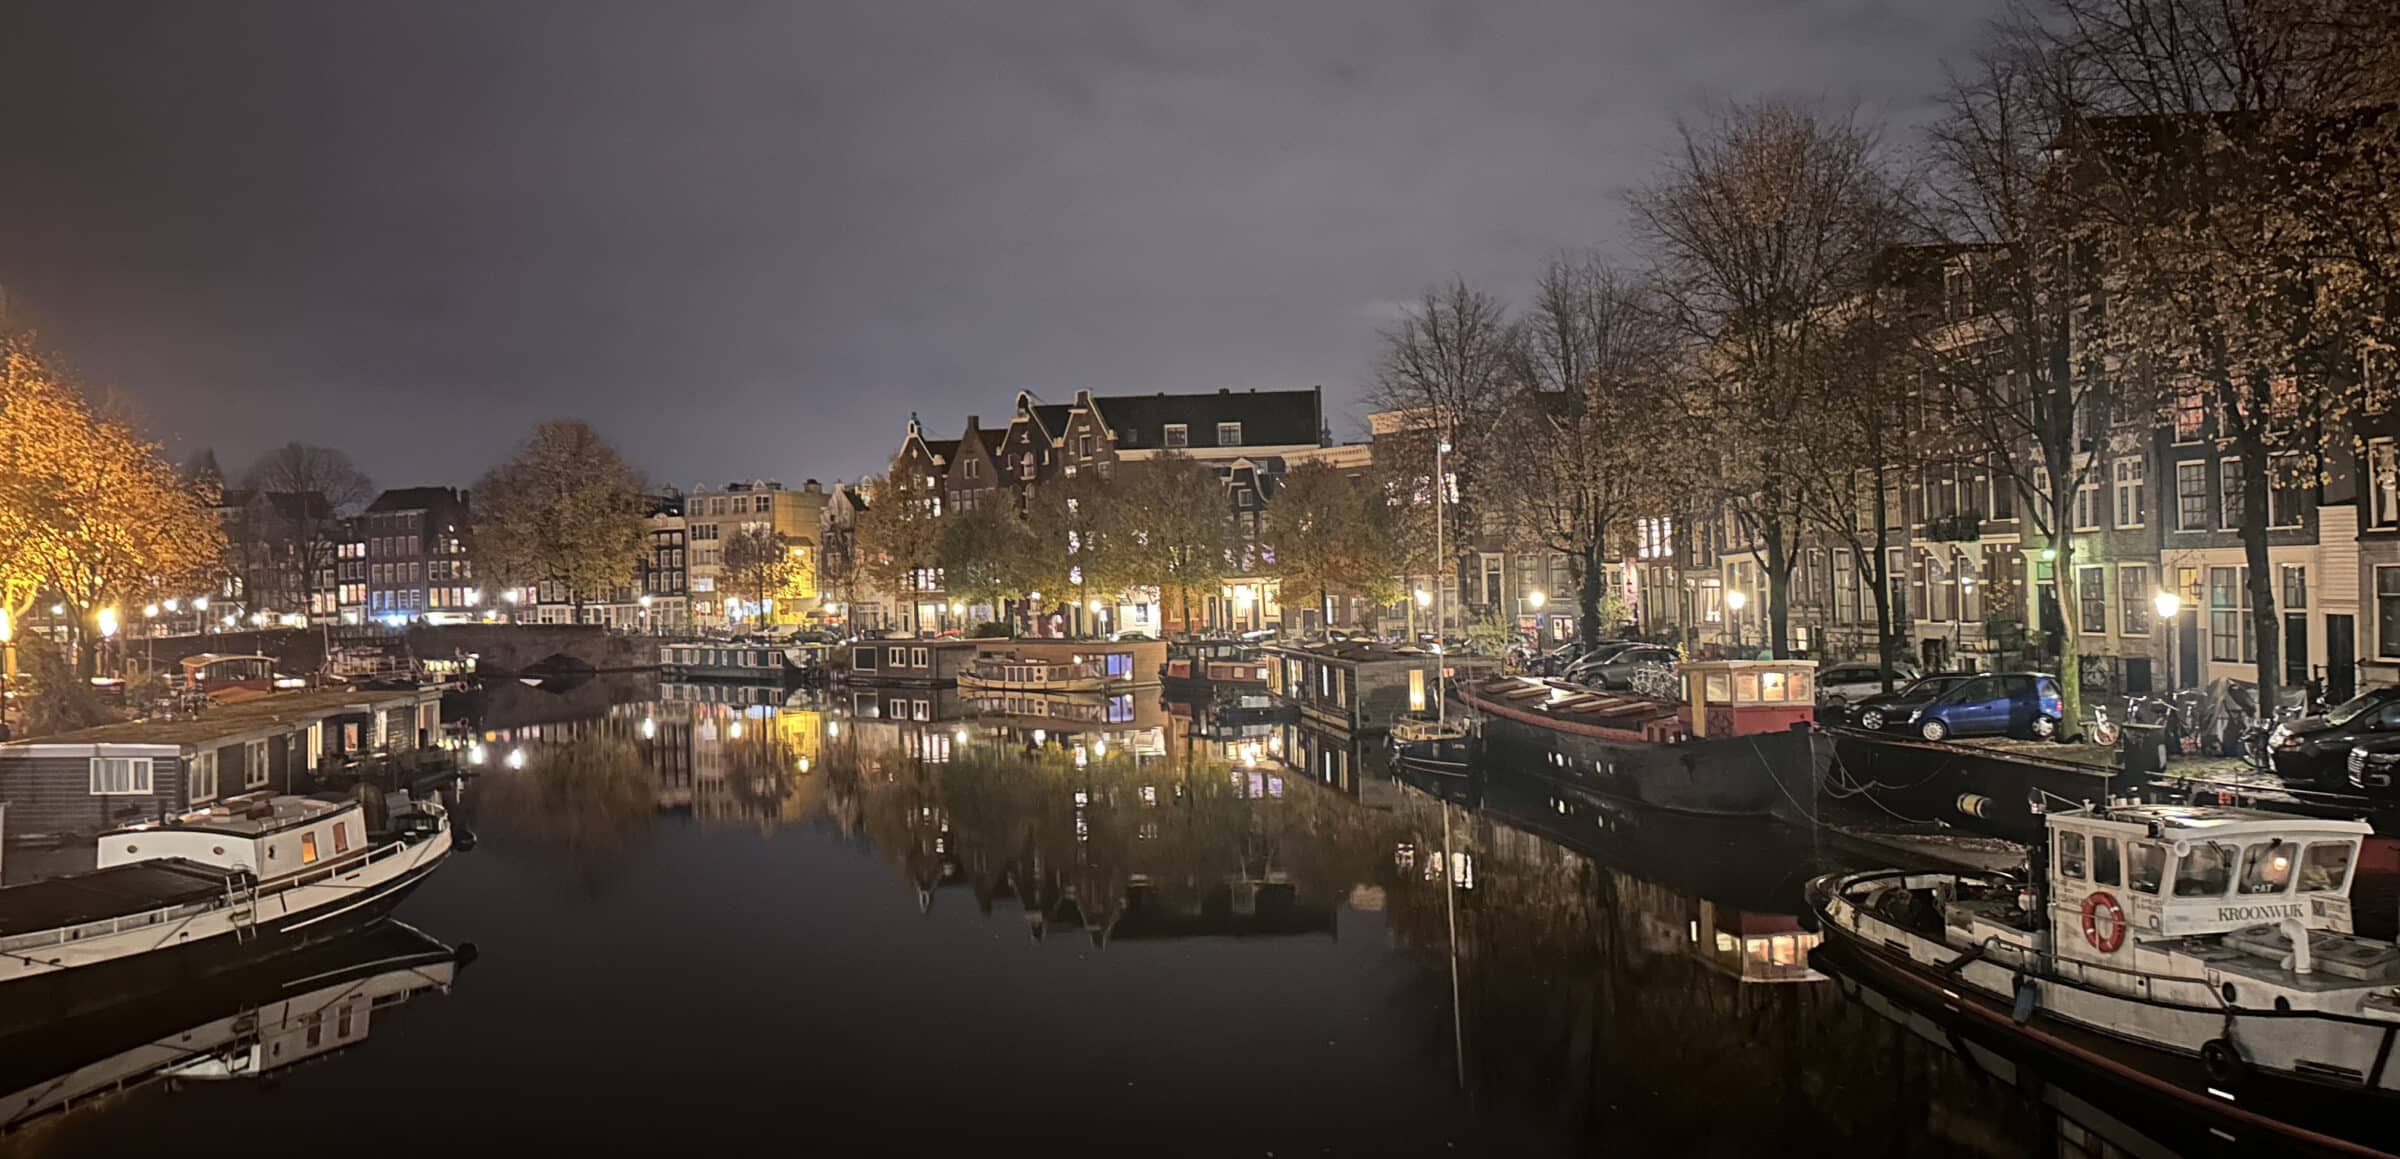 Your obligatory Amsterdam canal shot